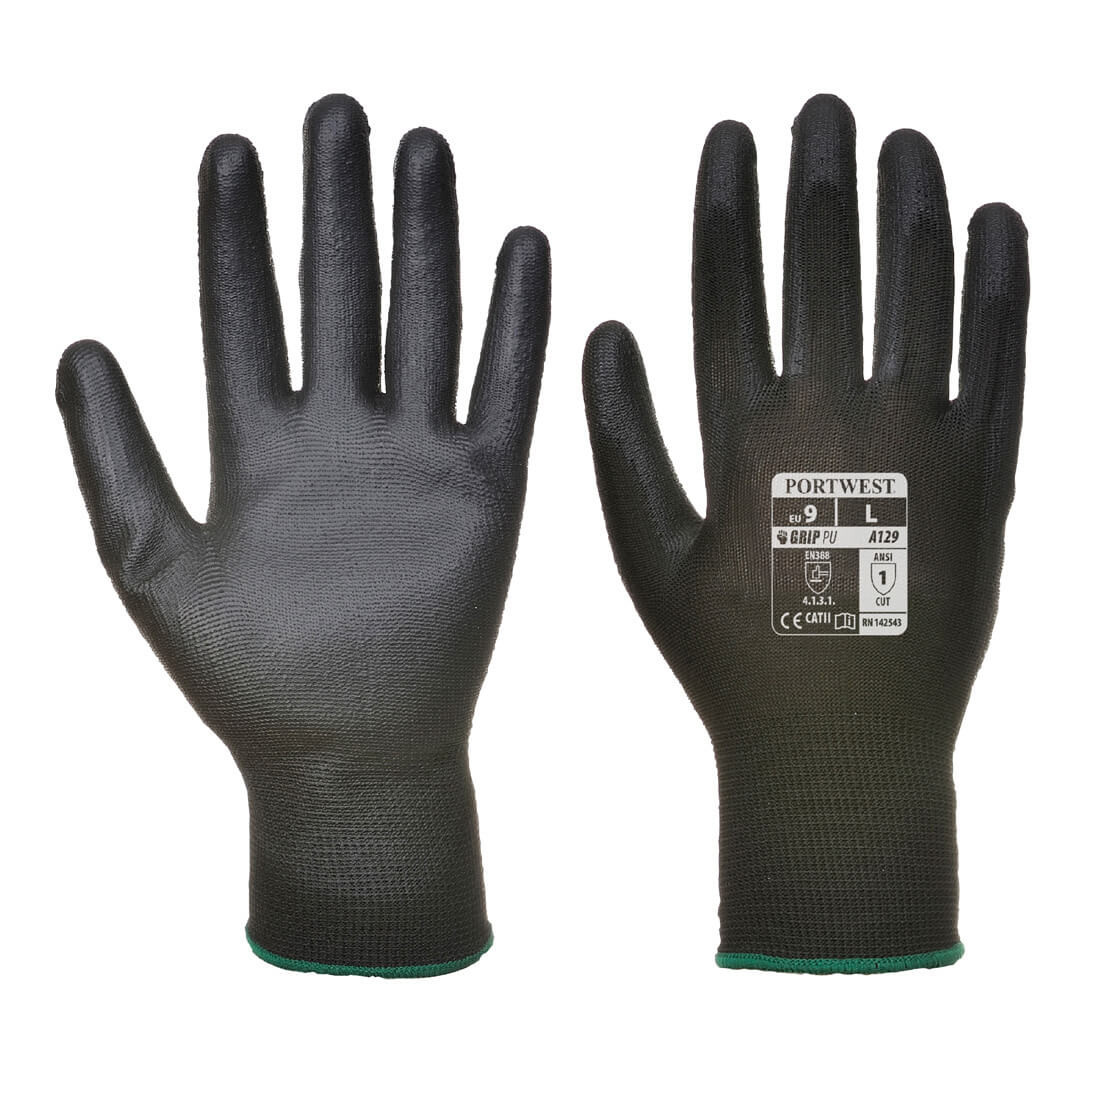 PU Palm Glove - Personal protection